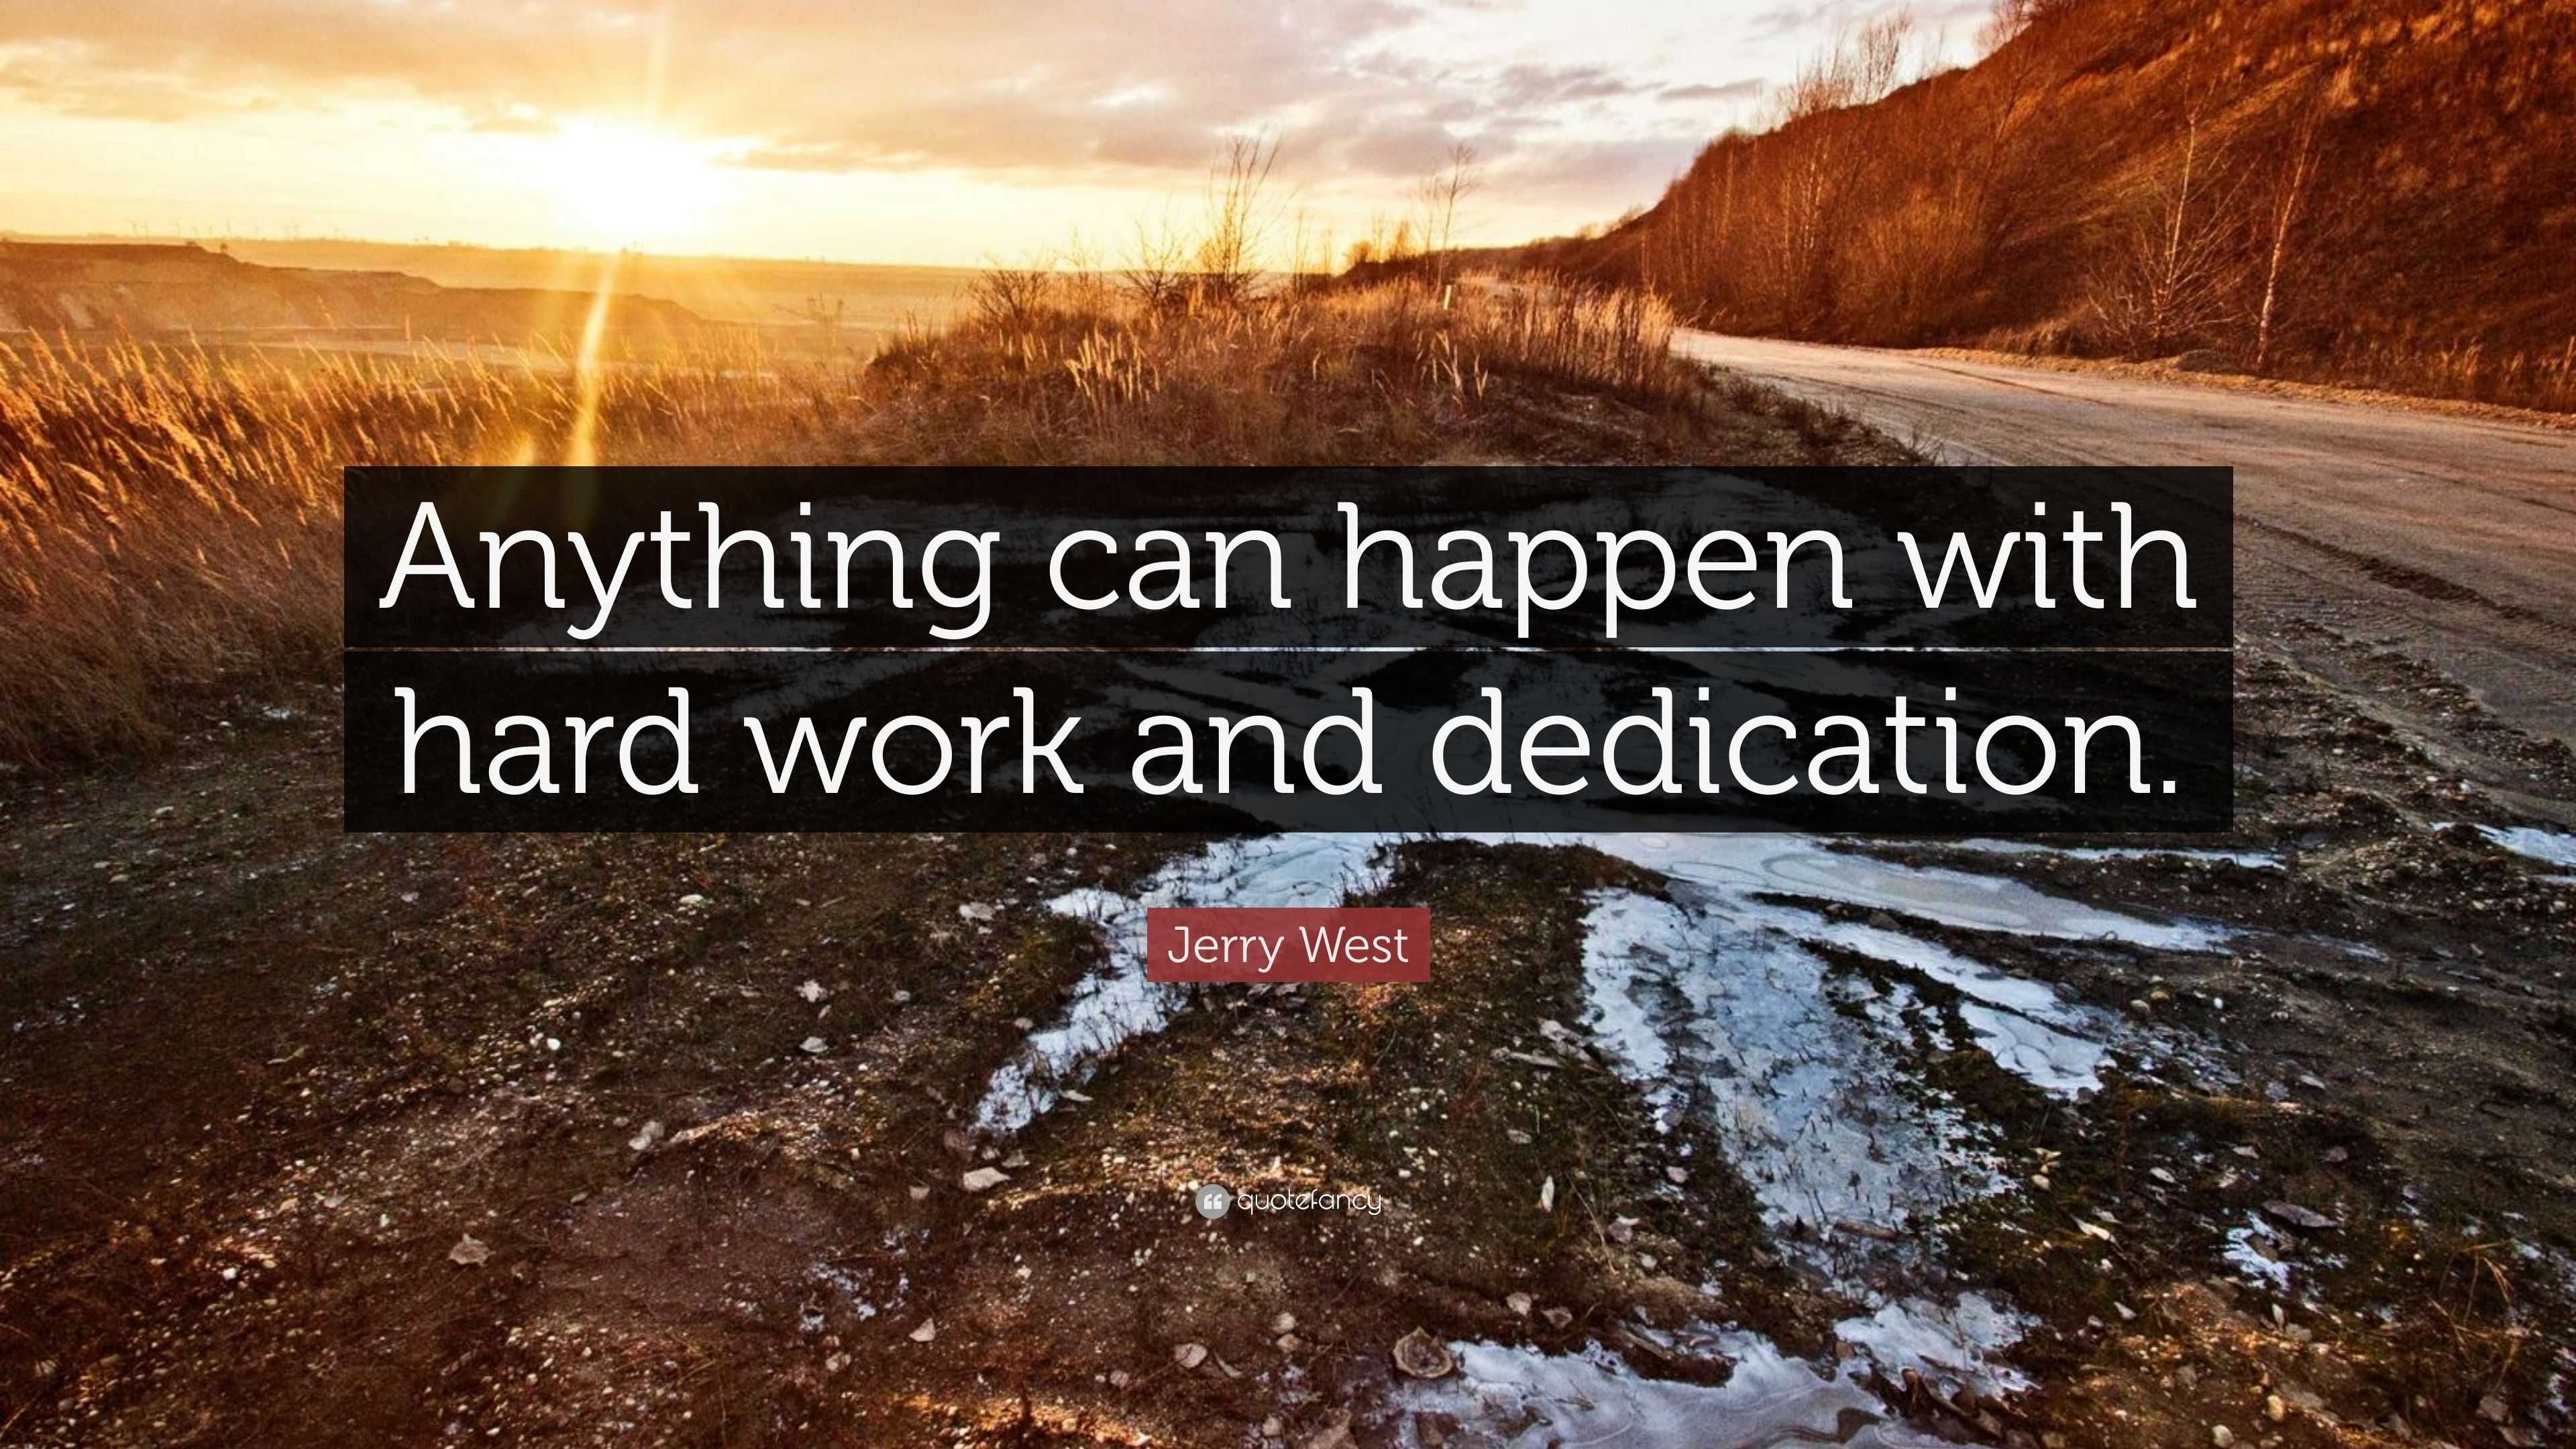 "anything can happen with hard work and dedication.